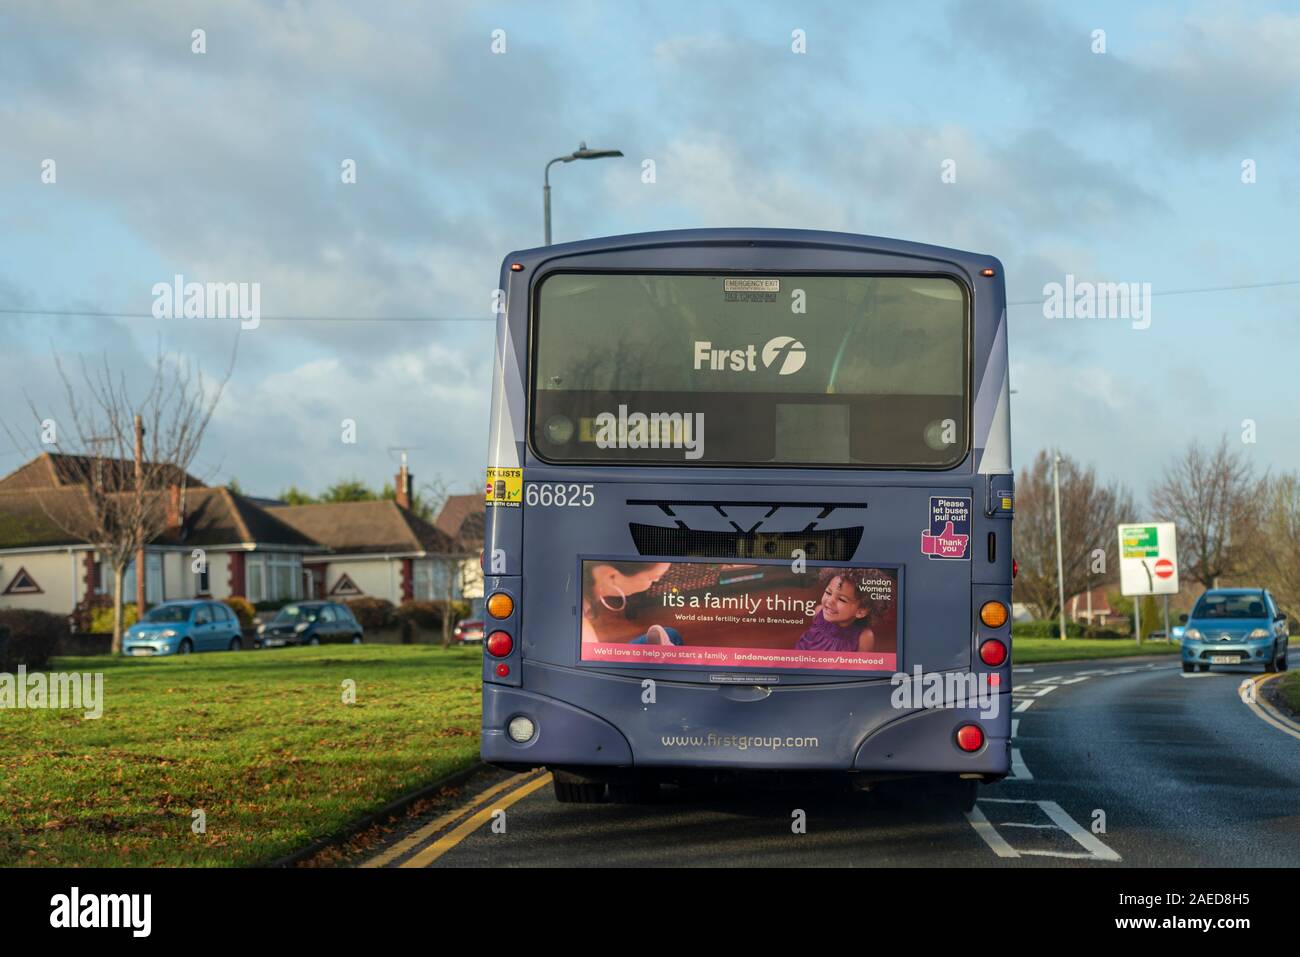 First Group, FirstGroup, First Essex bus with London Women's Clinic fertility advertisement, advert, on the back. Driving on road. Old diesel bus Stock Photo